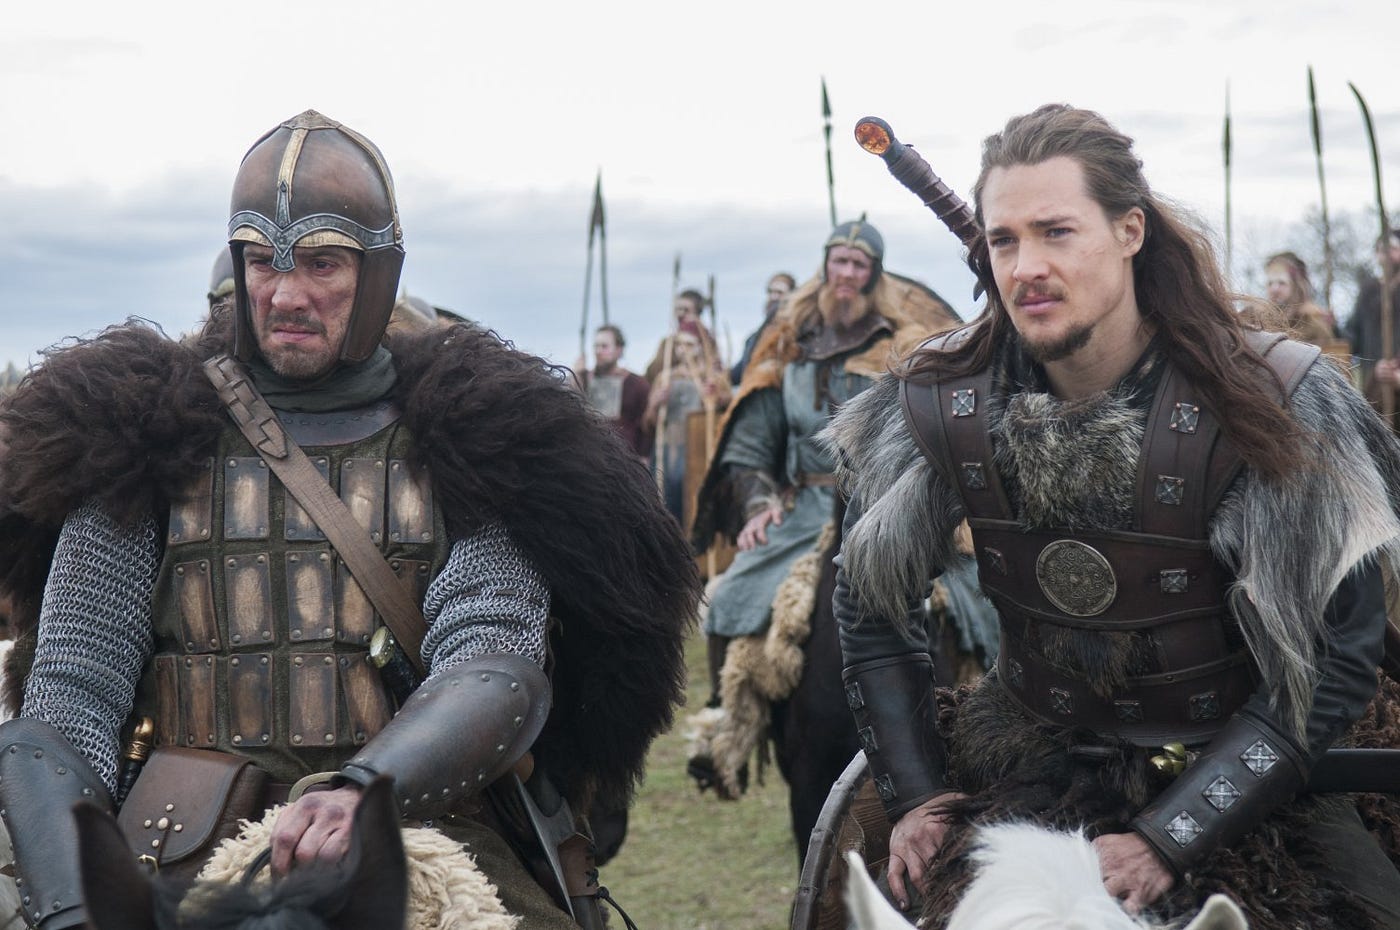 A long path back to that Last Kingdom and the real Uhtred the Bold